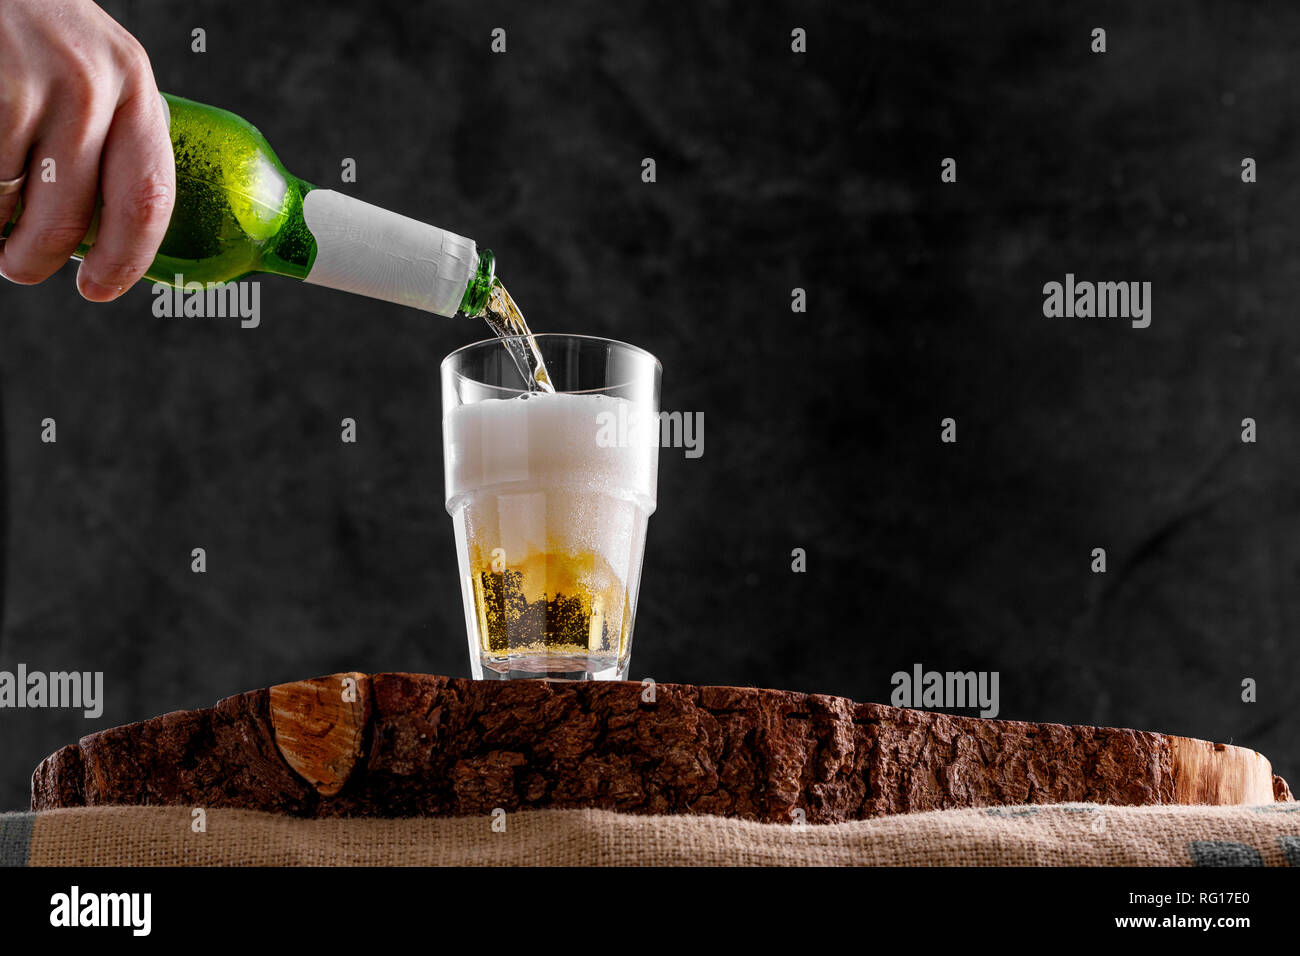 A hand is pouring fresh beer from a bottle into a glass goblet on a wooden background. Close-up. Copy space. Stock Photo